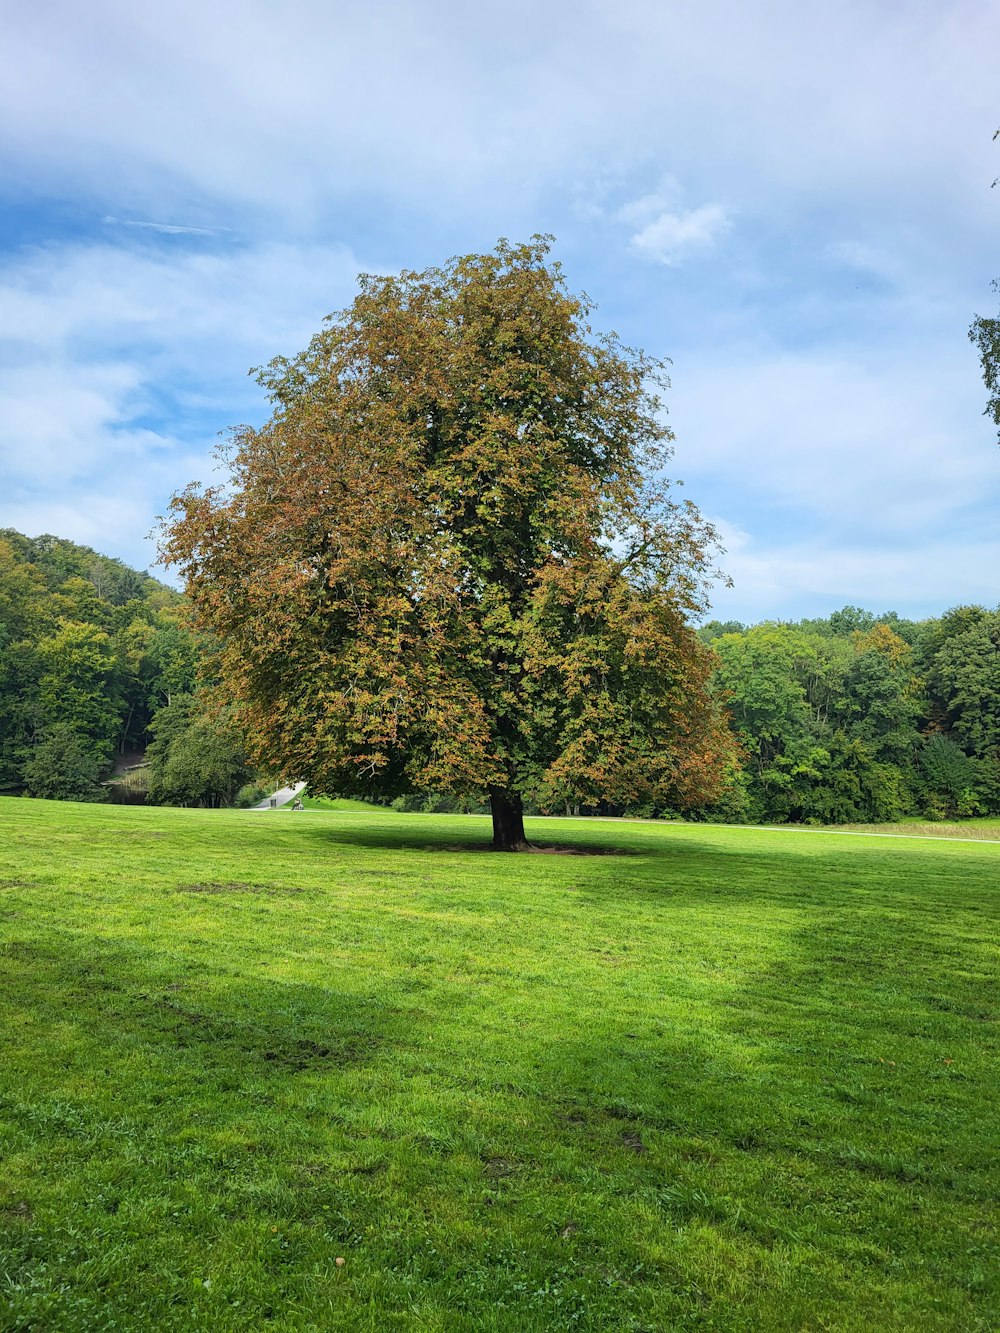 a large tree in a grassy field with trees in the background